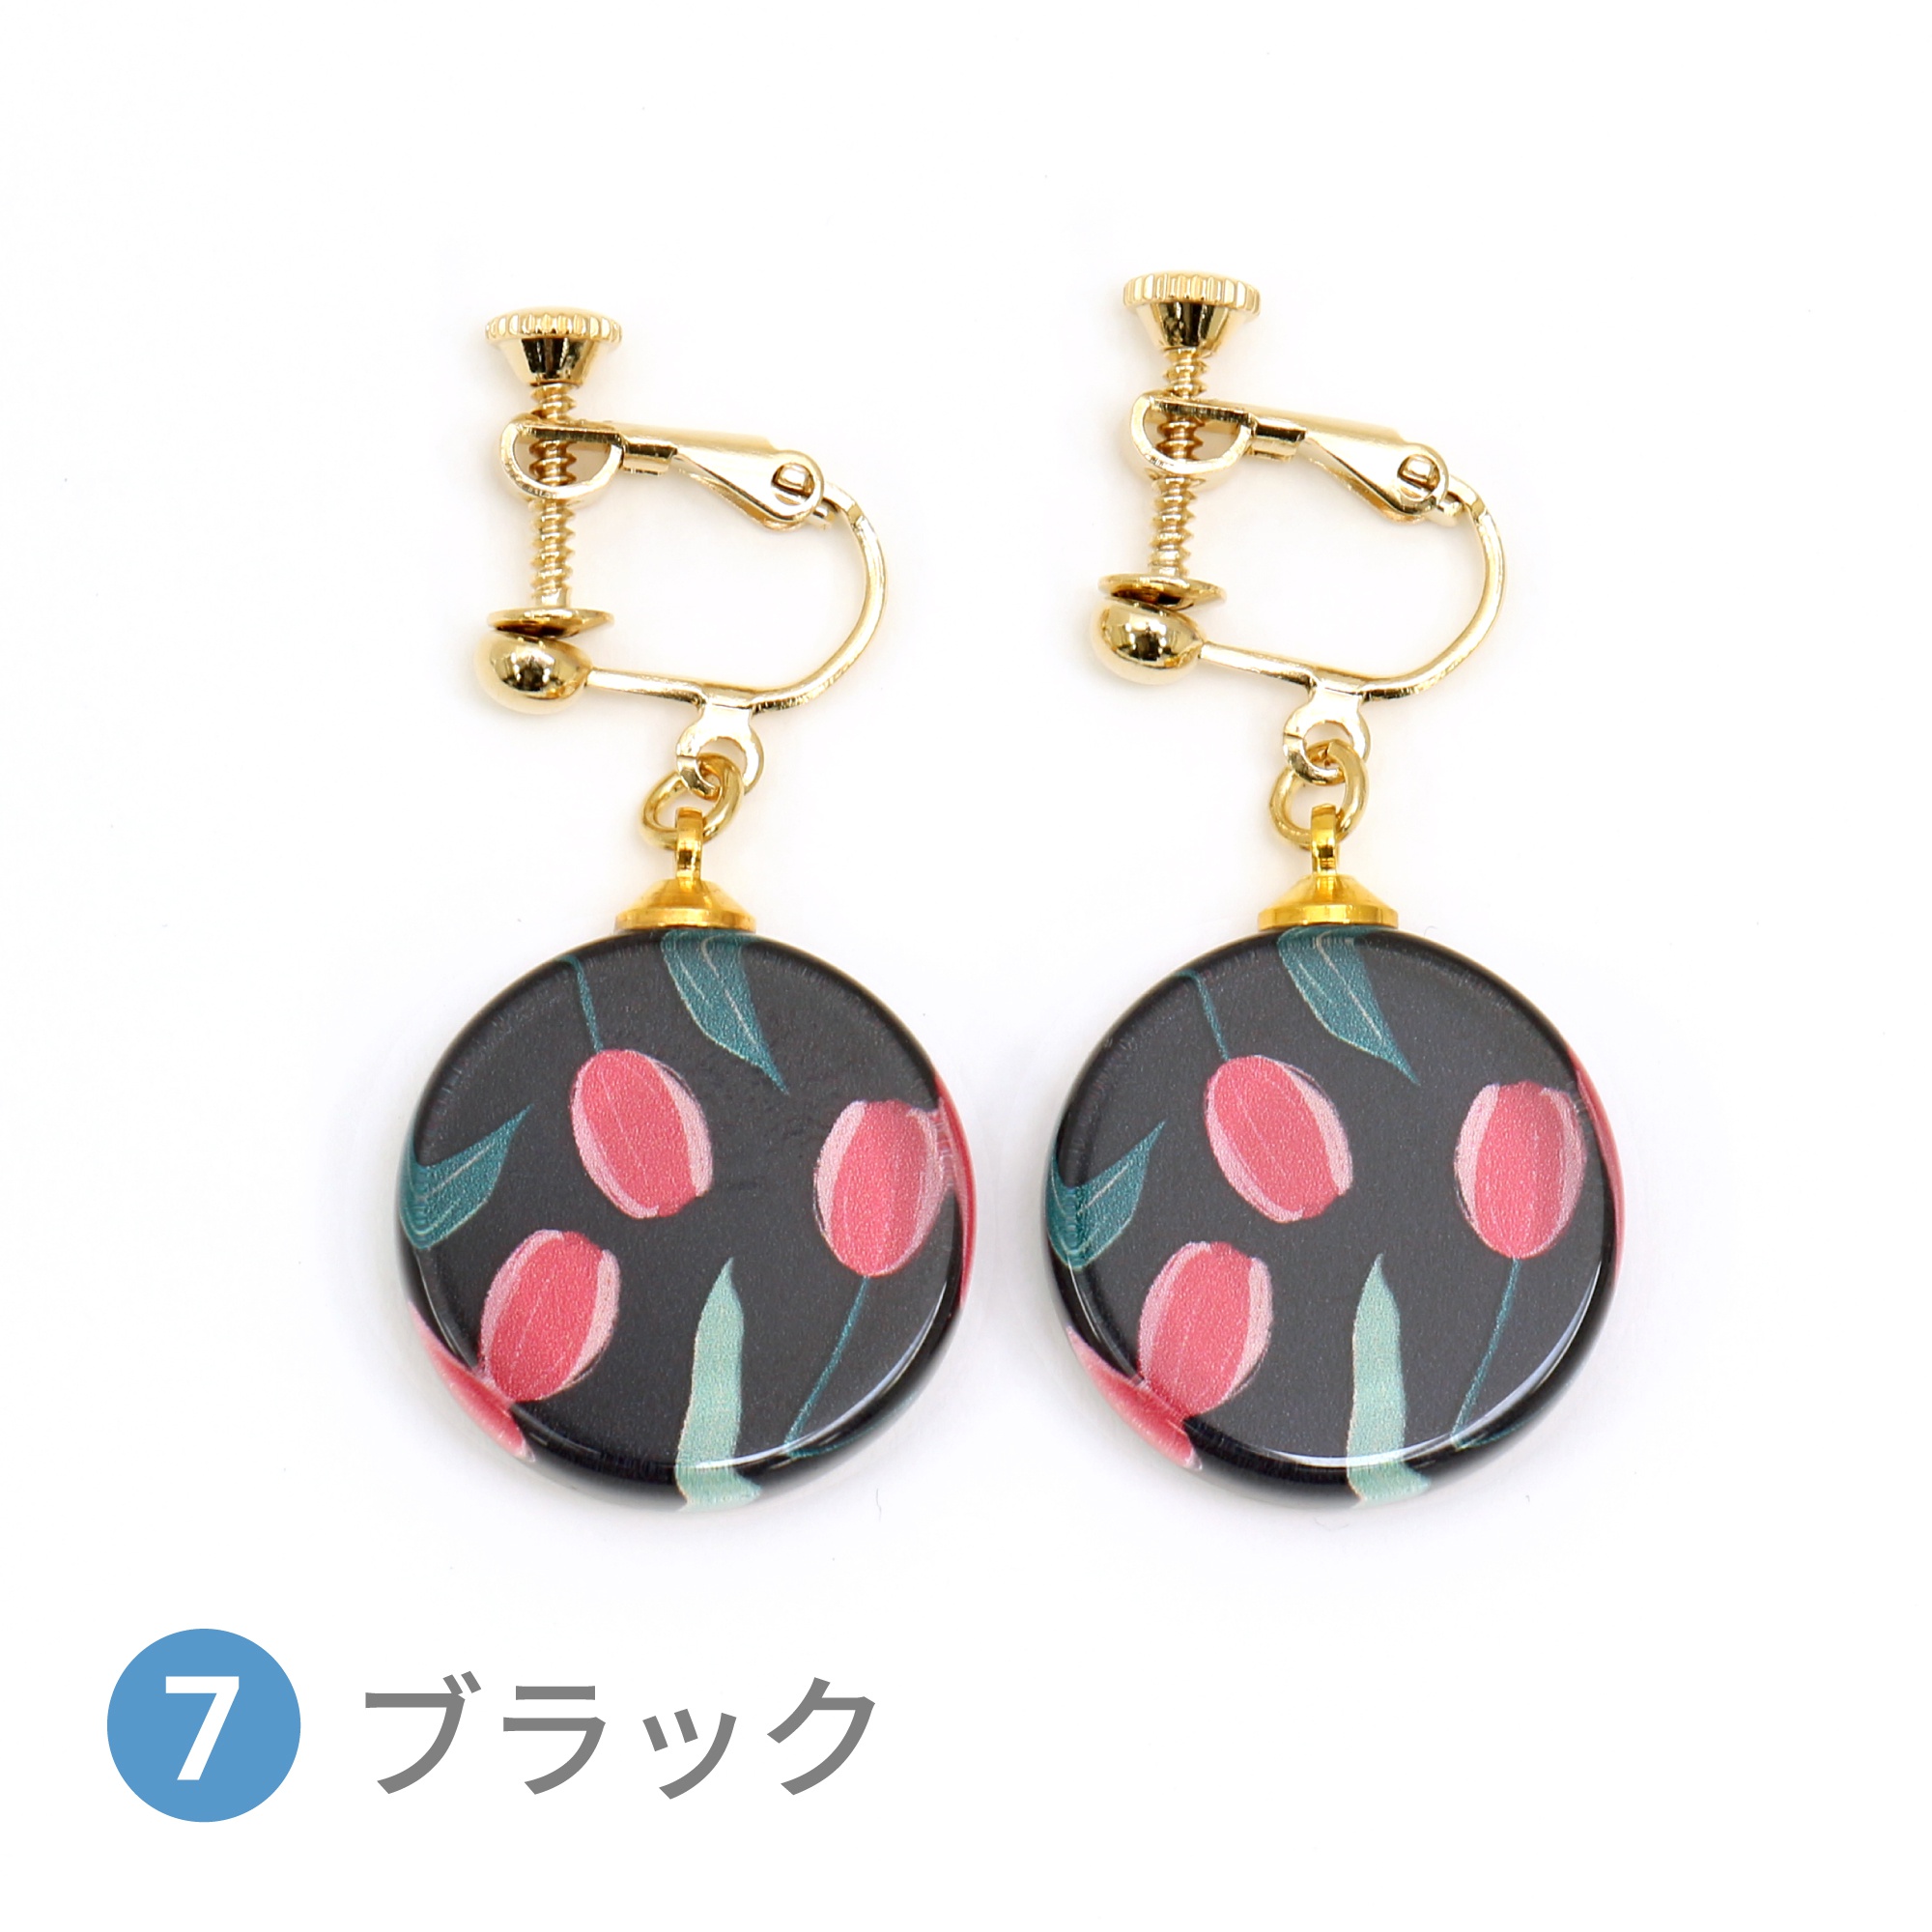 Glass accessories Earring TULIP black round shape